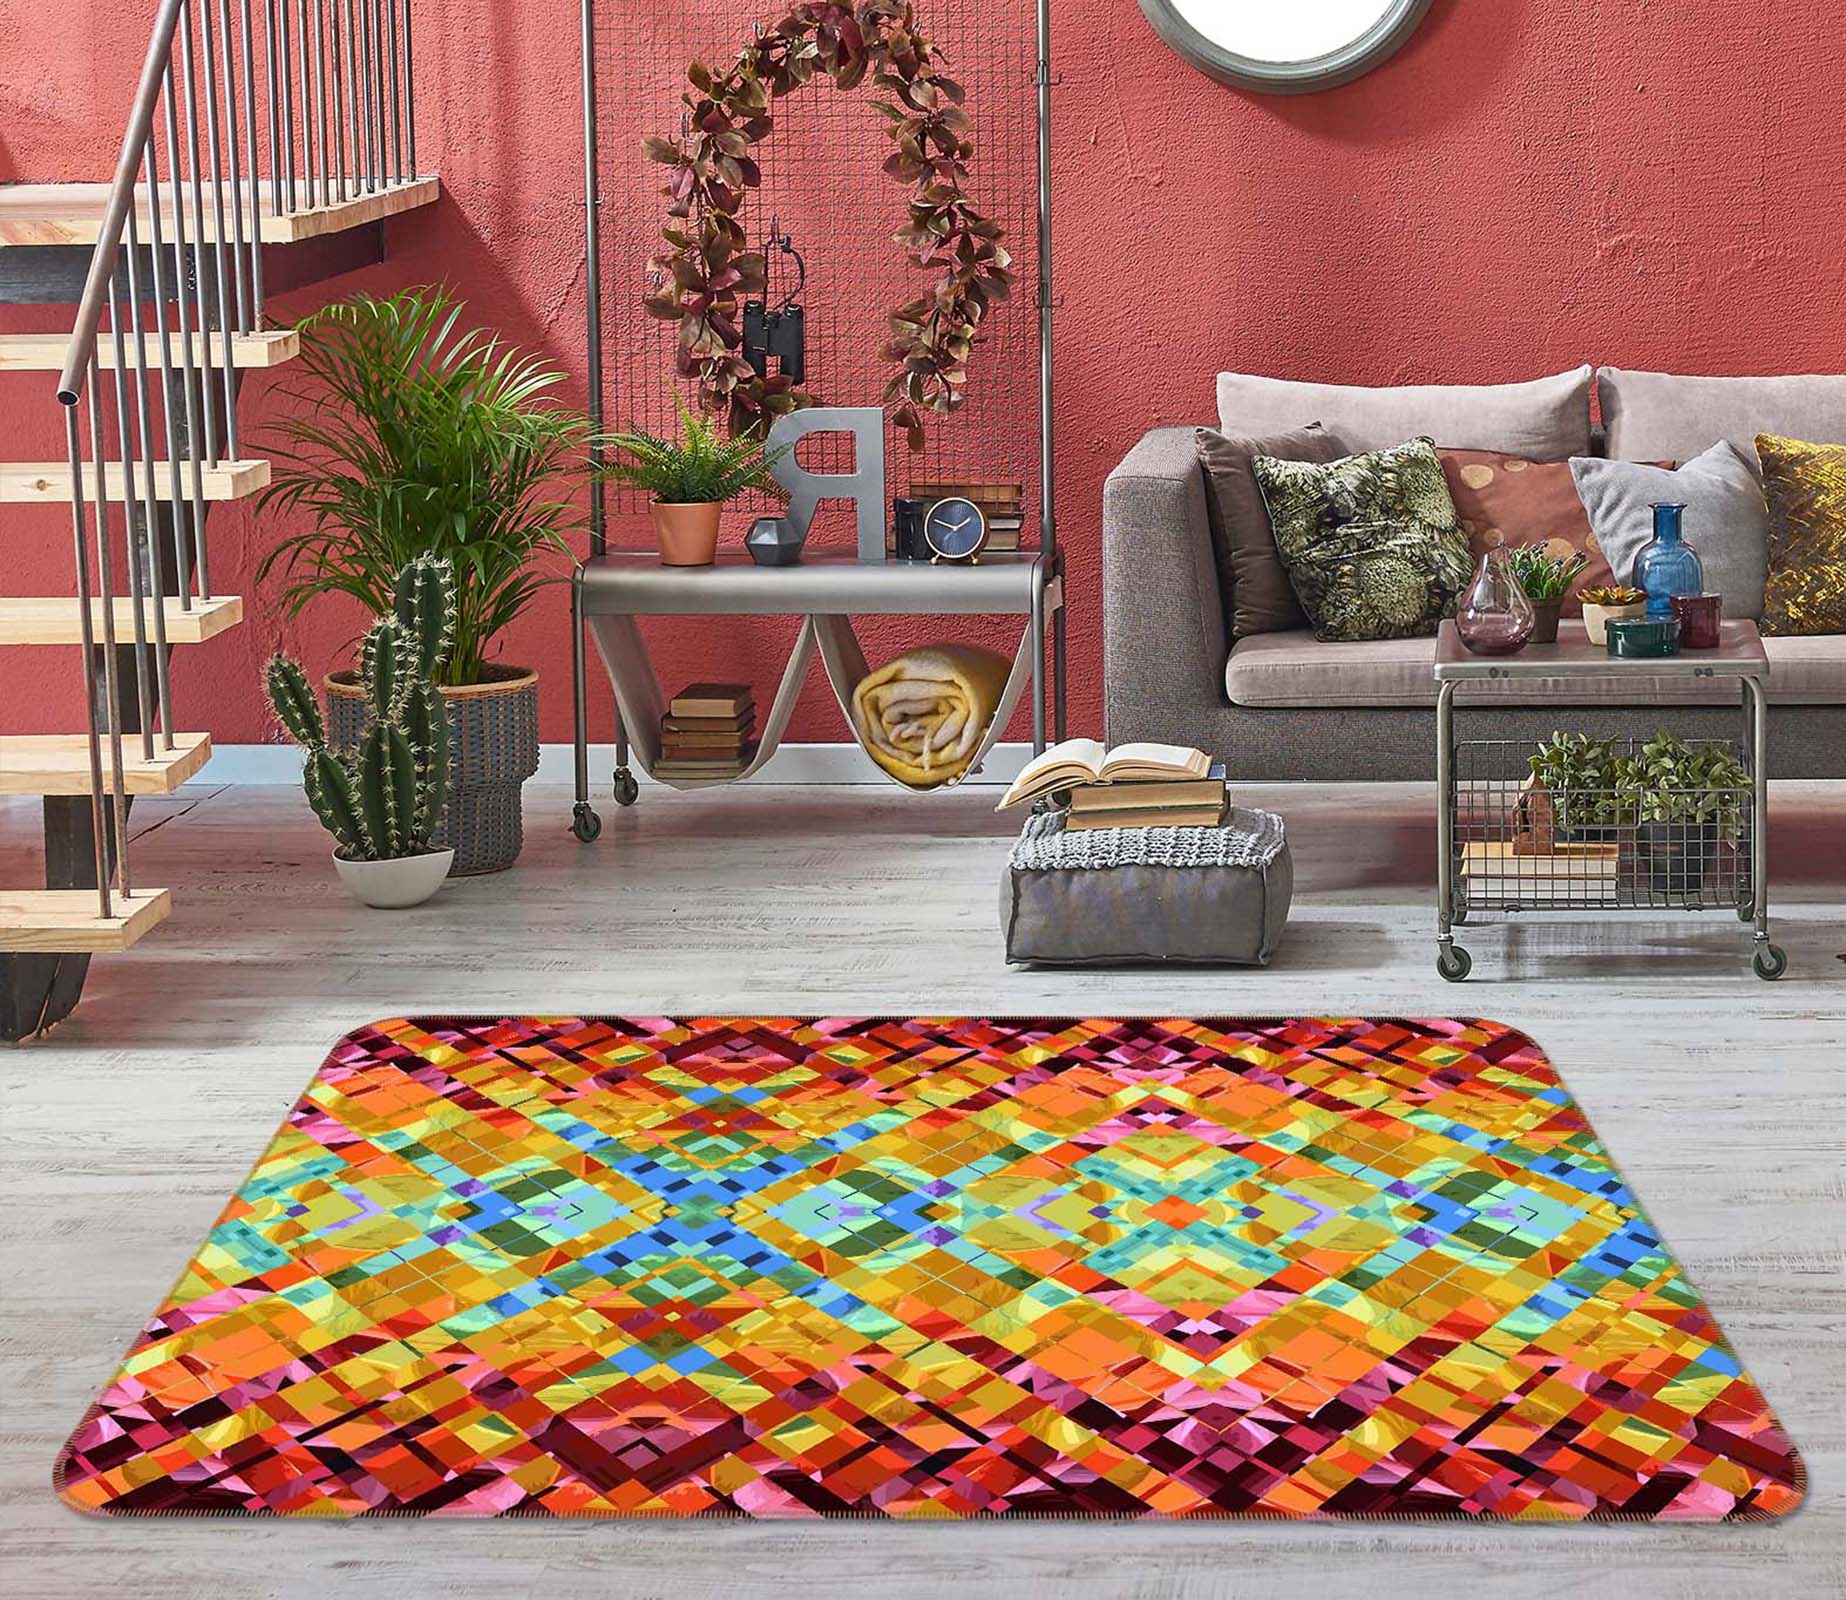 3D Colorful Pattern 1002 Shandra Smith Rug Non Slip Rug Mat